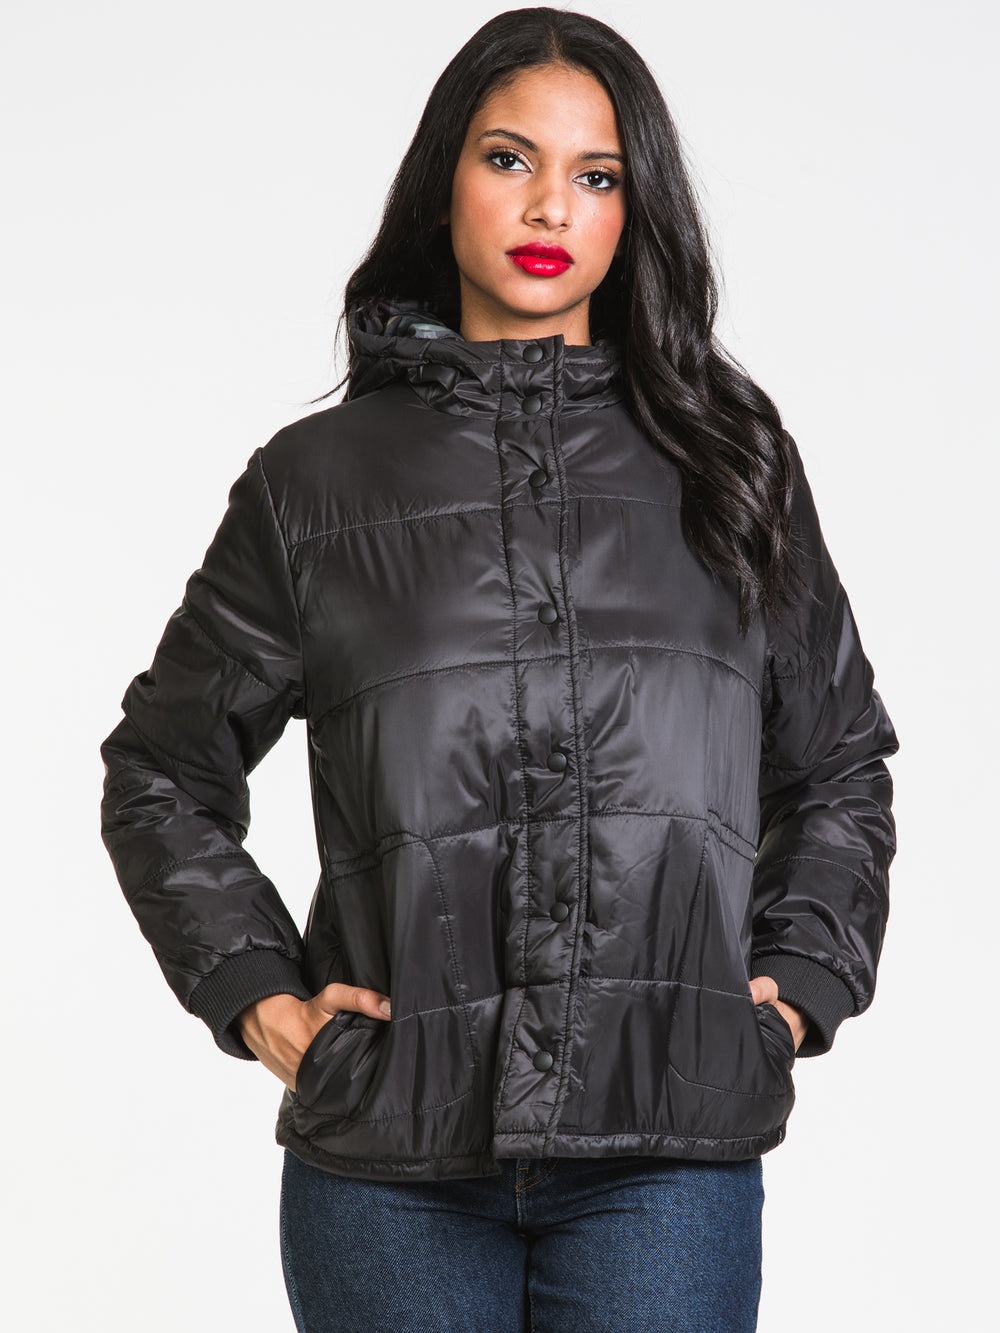 VOLCOM PUFF IT UP JACKET  - CLEARANCE